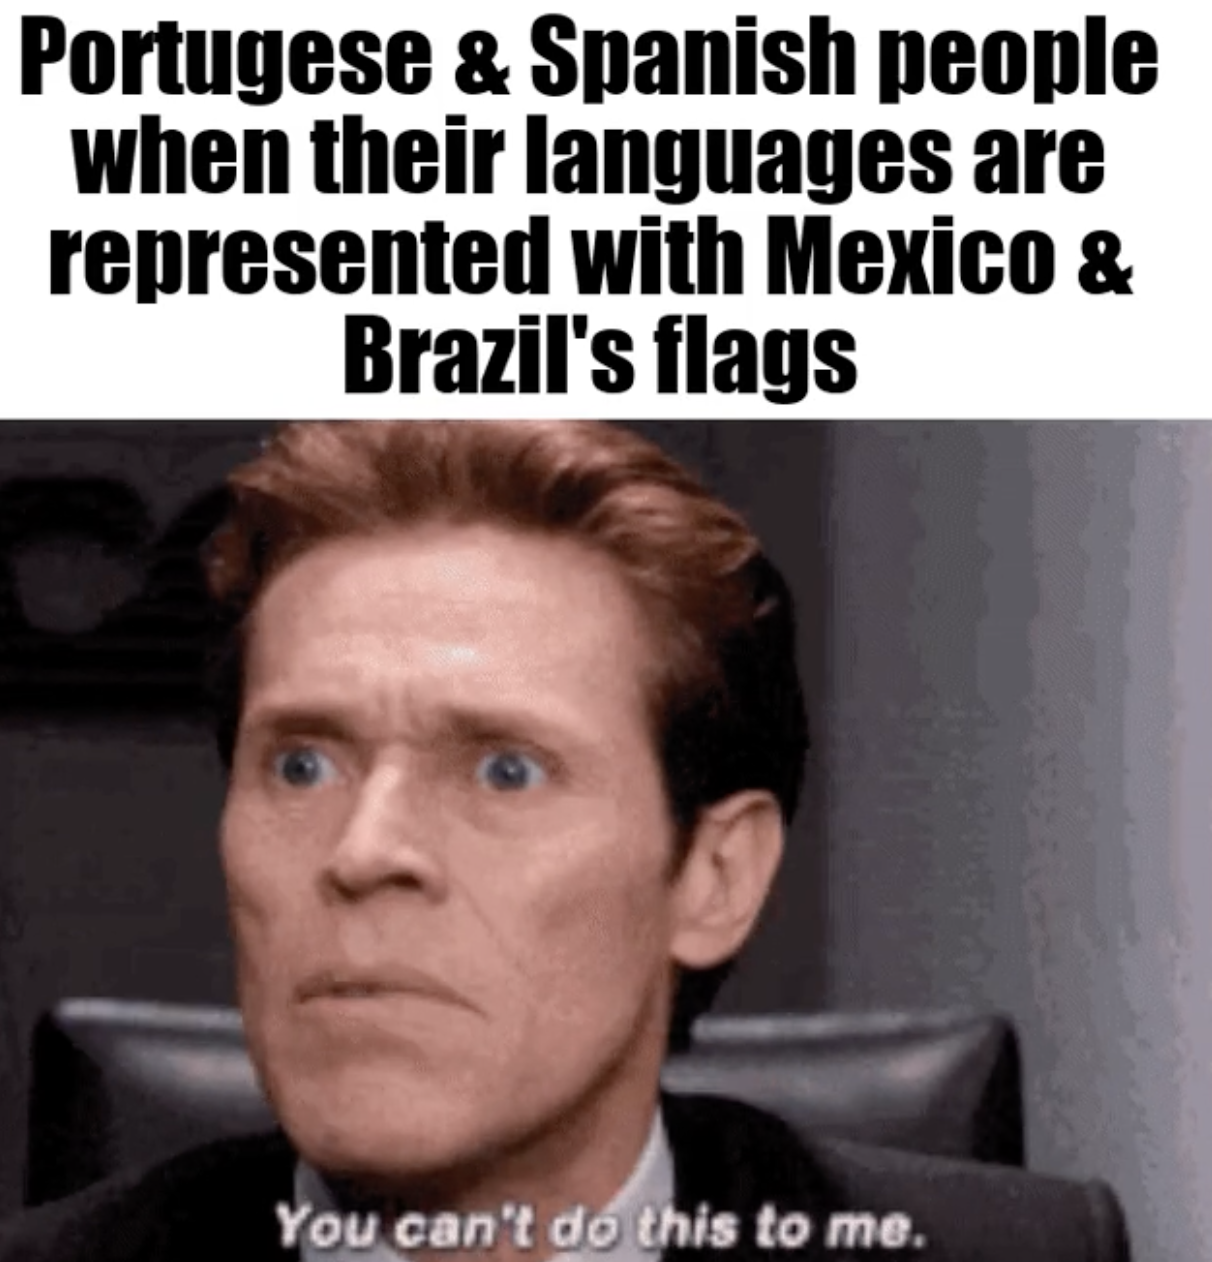 Spider-Man PS4 Memes - photo caption - Portugese & Spanish people when their languages are represented with Mexico & Brazil's flags You can't do this to me.